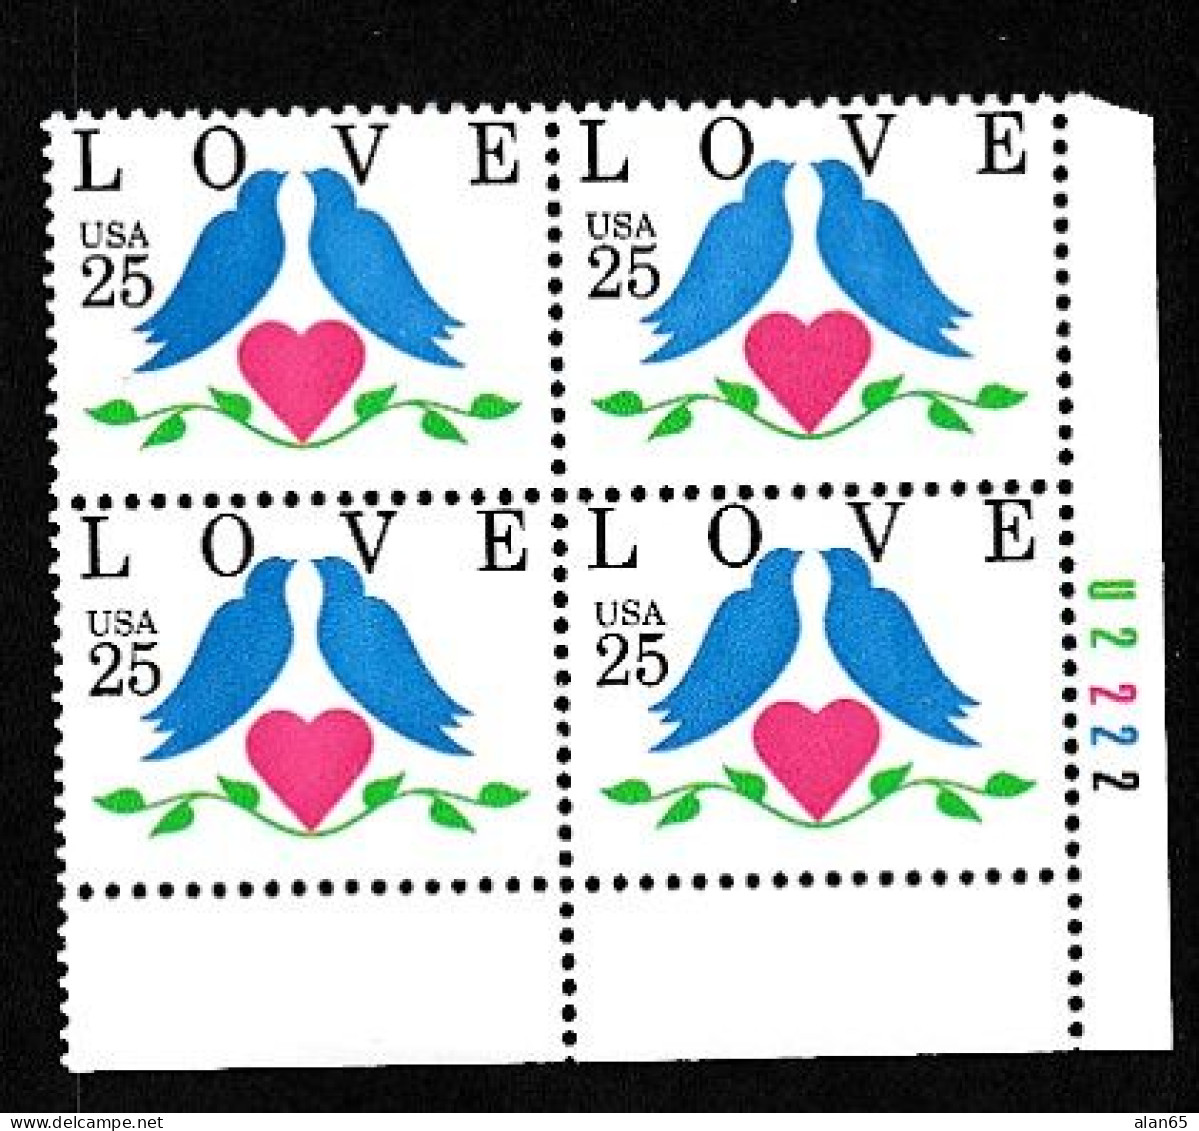 Sc#2440 'Love' Birds And Heart, 25-cent 1990 Issue, Plate # Block Of 4 MNH US Postage Stamps - Plattennummern